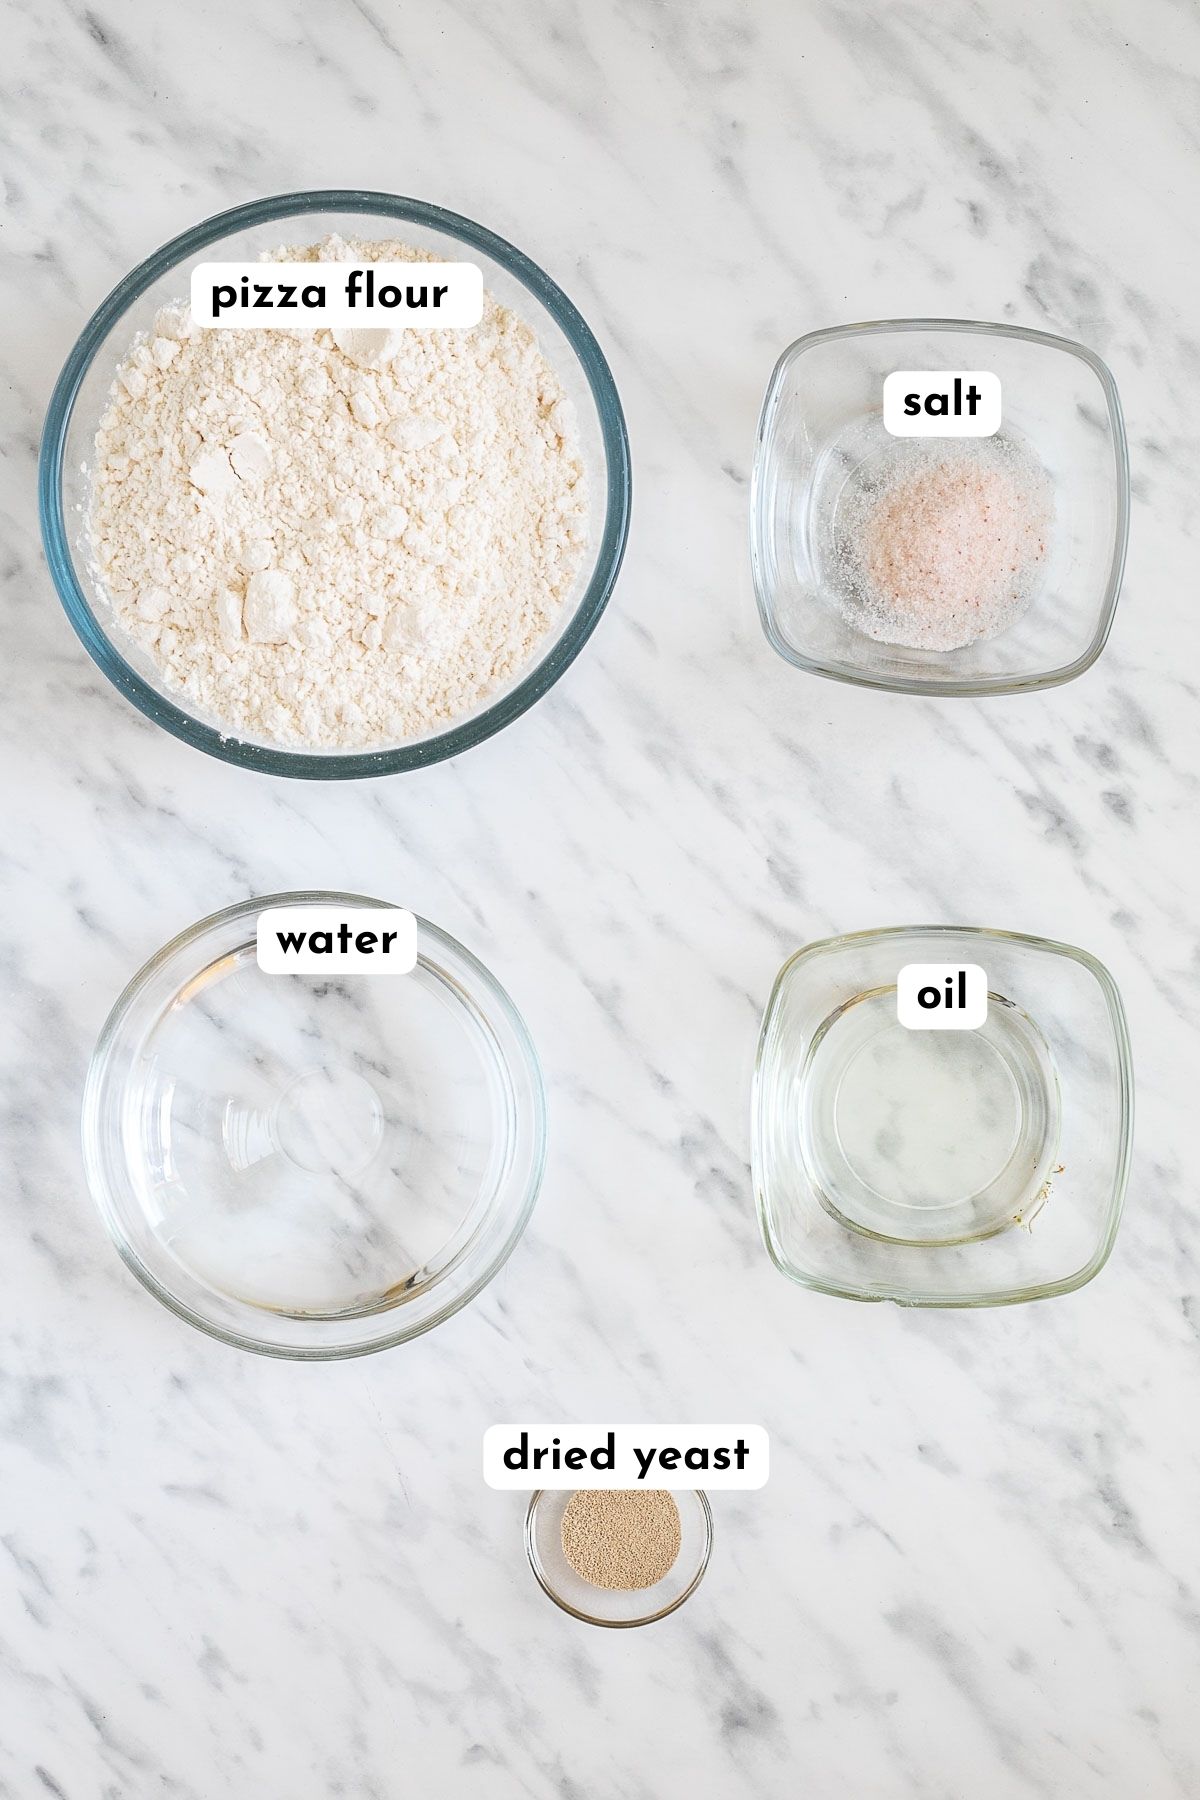 Ingredients of gluten-free pizza crust in small glass bowls: flour, salt, water, oil and dry yeast